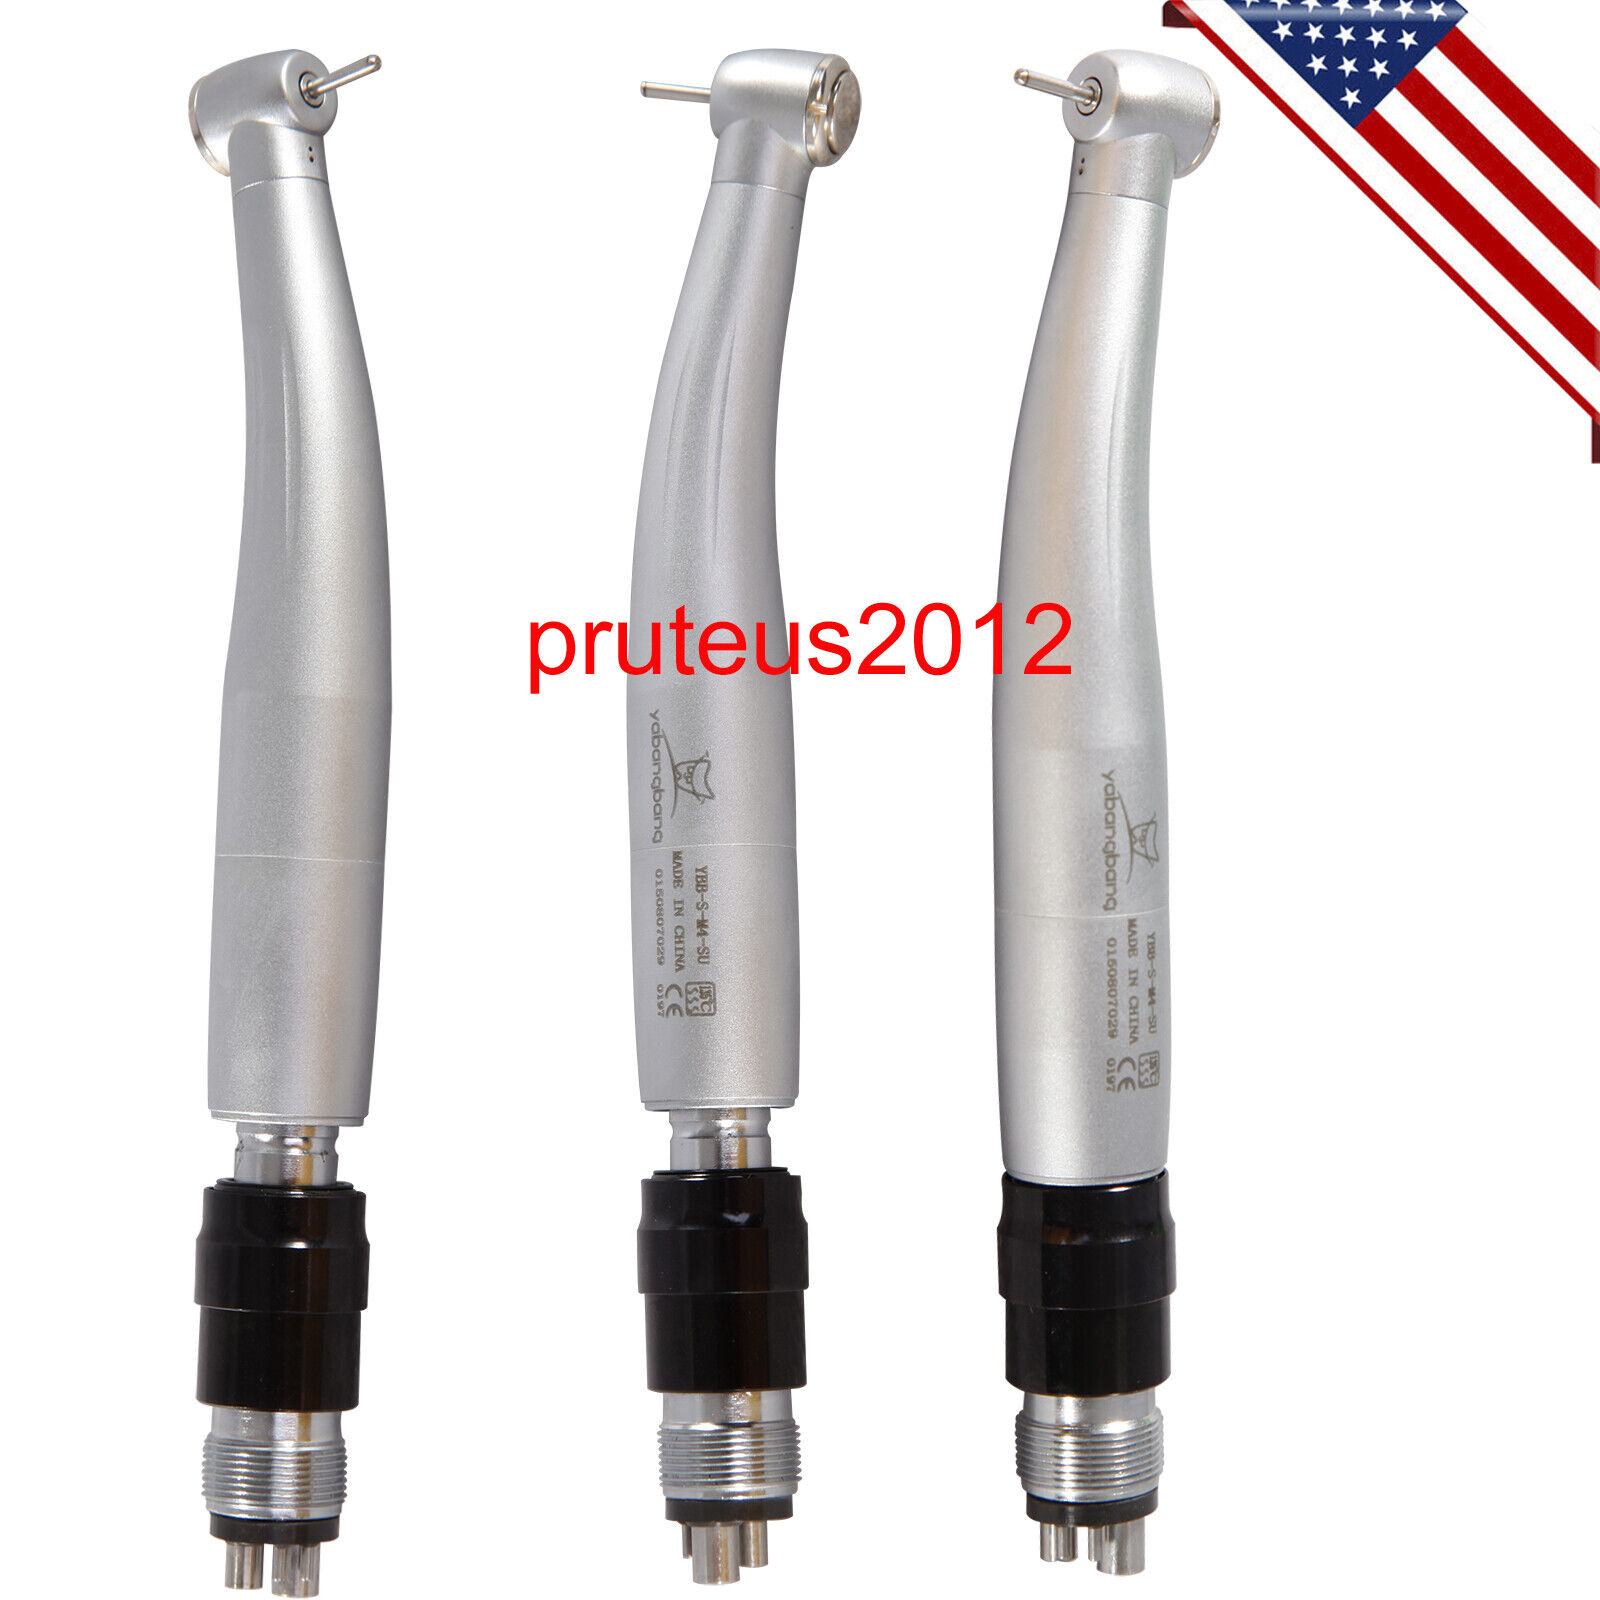 1PC NSK Style Dental High Speed Handpiece with Quick Coupler 4 Hole MEI